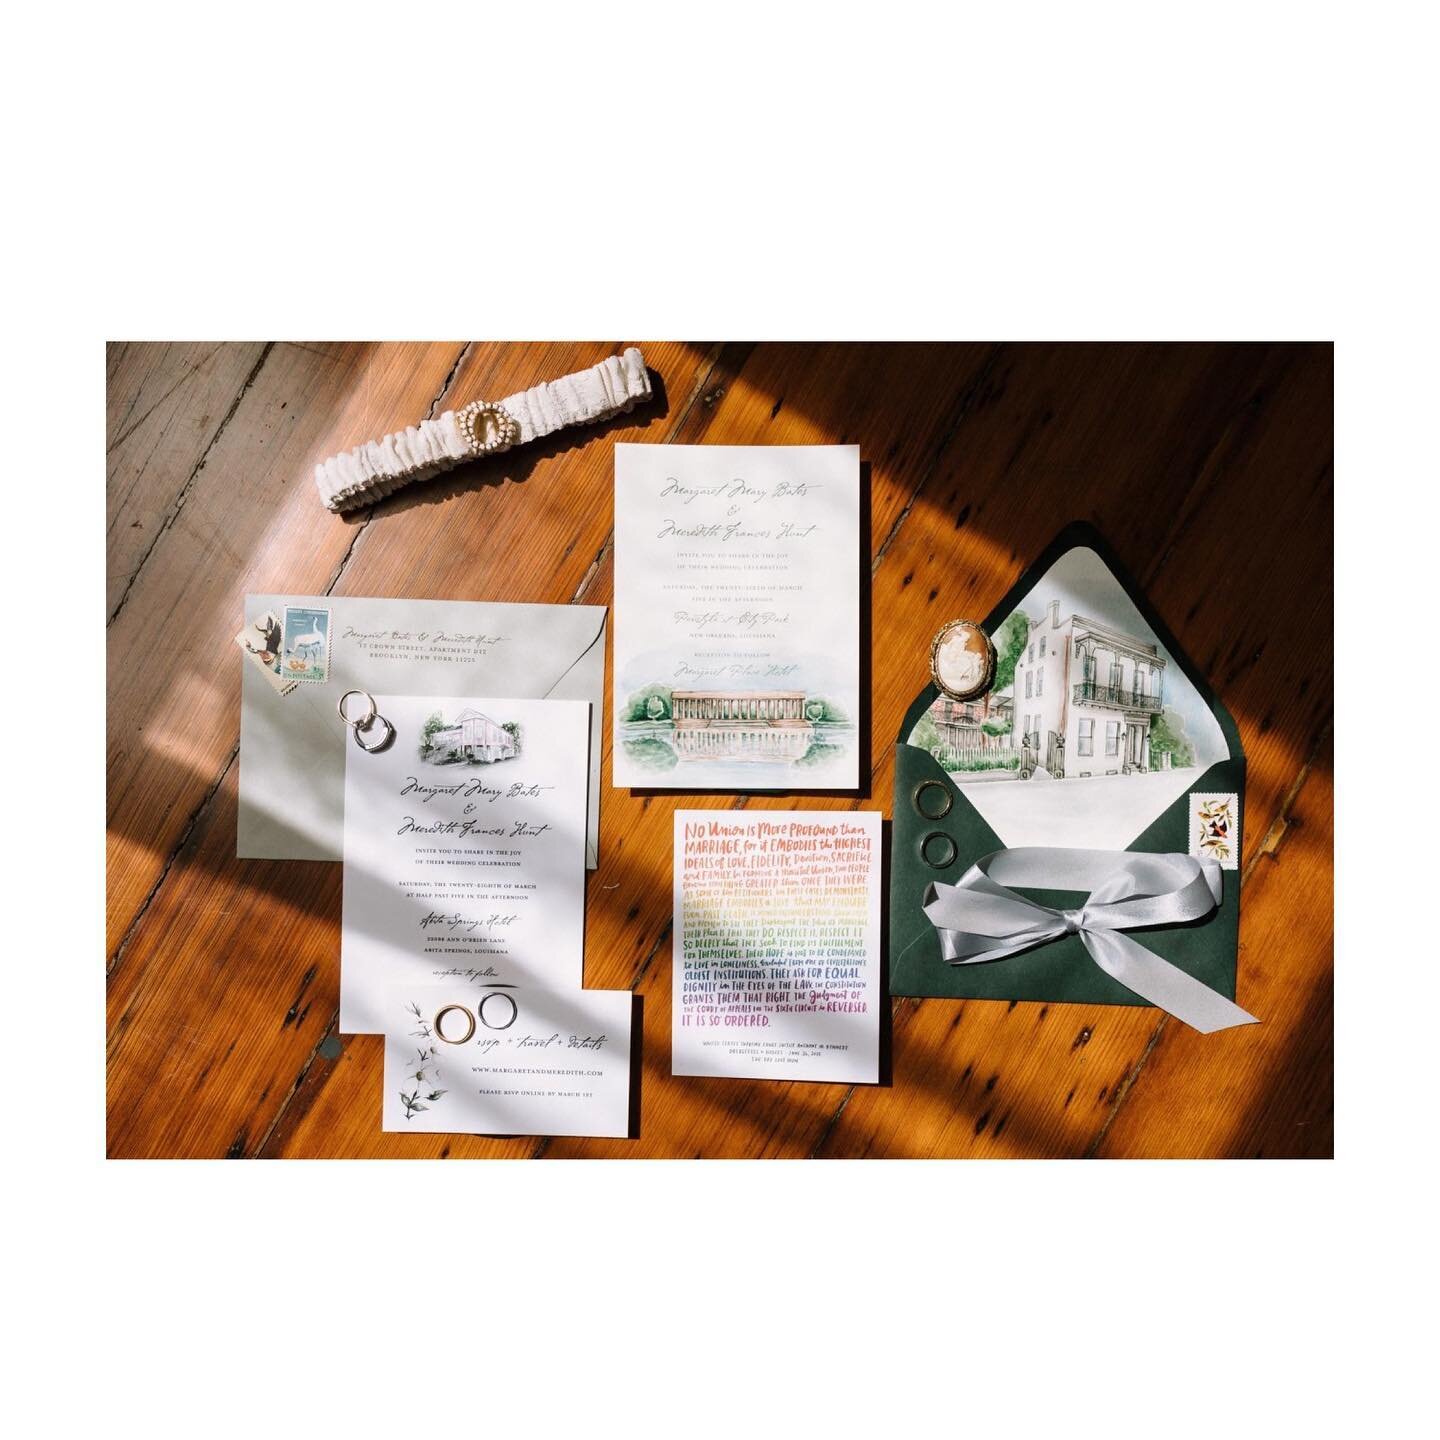 Perfection! That's the only word for Meredith and Margaret's wedding details. ⠀
⠀
I especially love their invitation suite featuring watercolor paintings of their venues and the rainbow rendition of Supreme Court Justice Kennedy's statement proclaimi